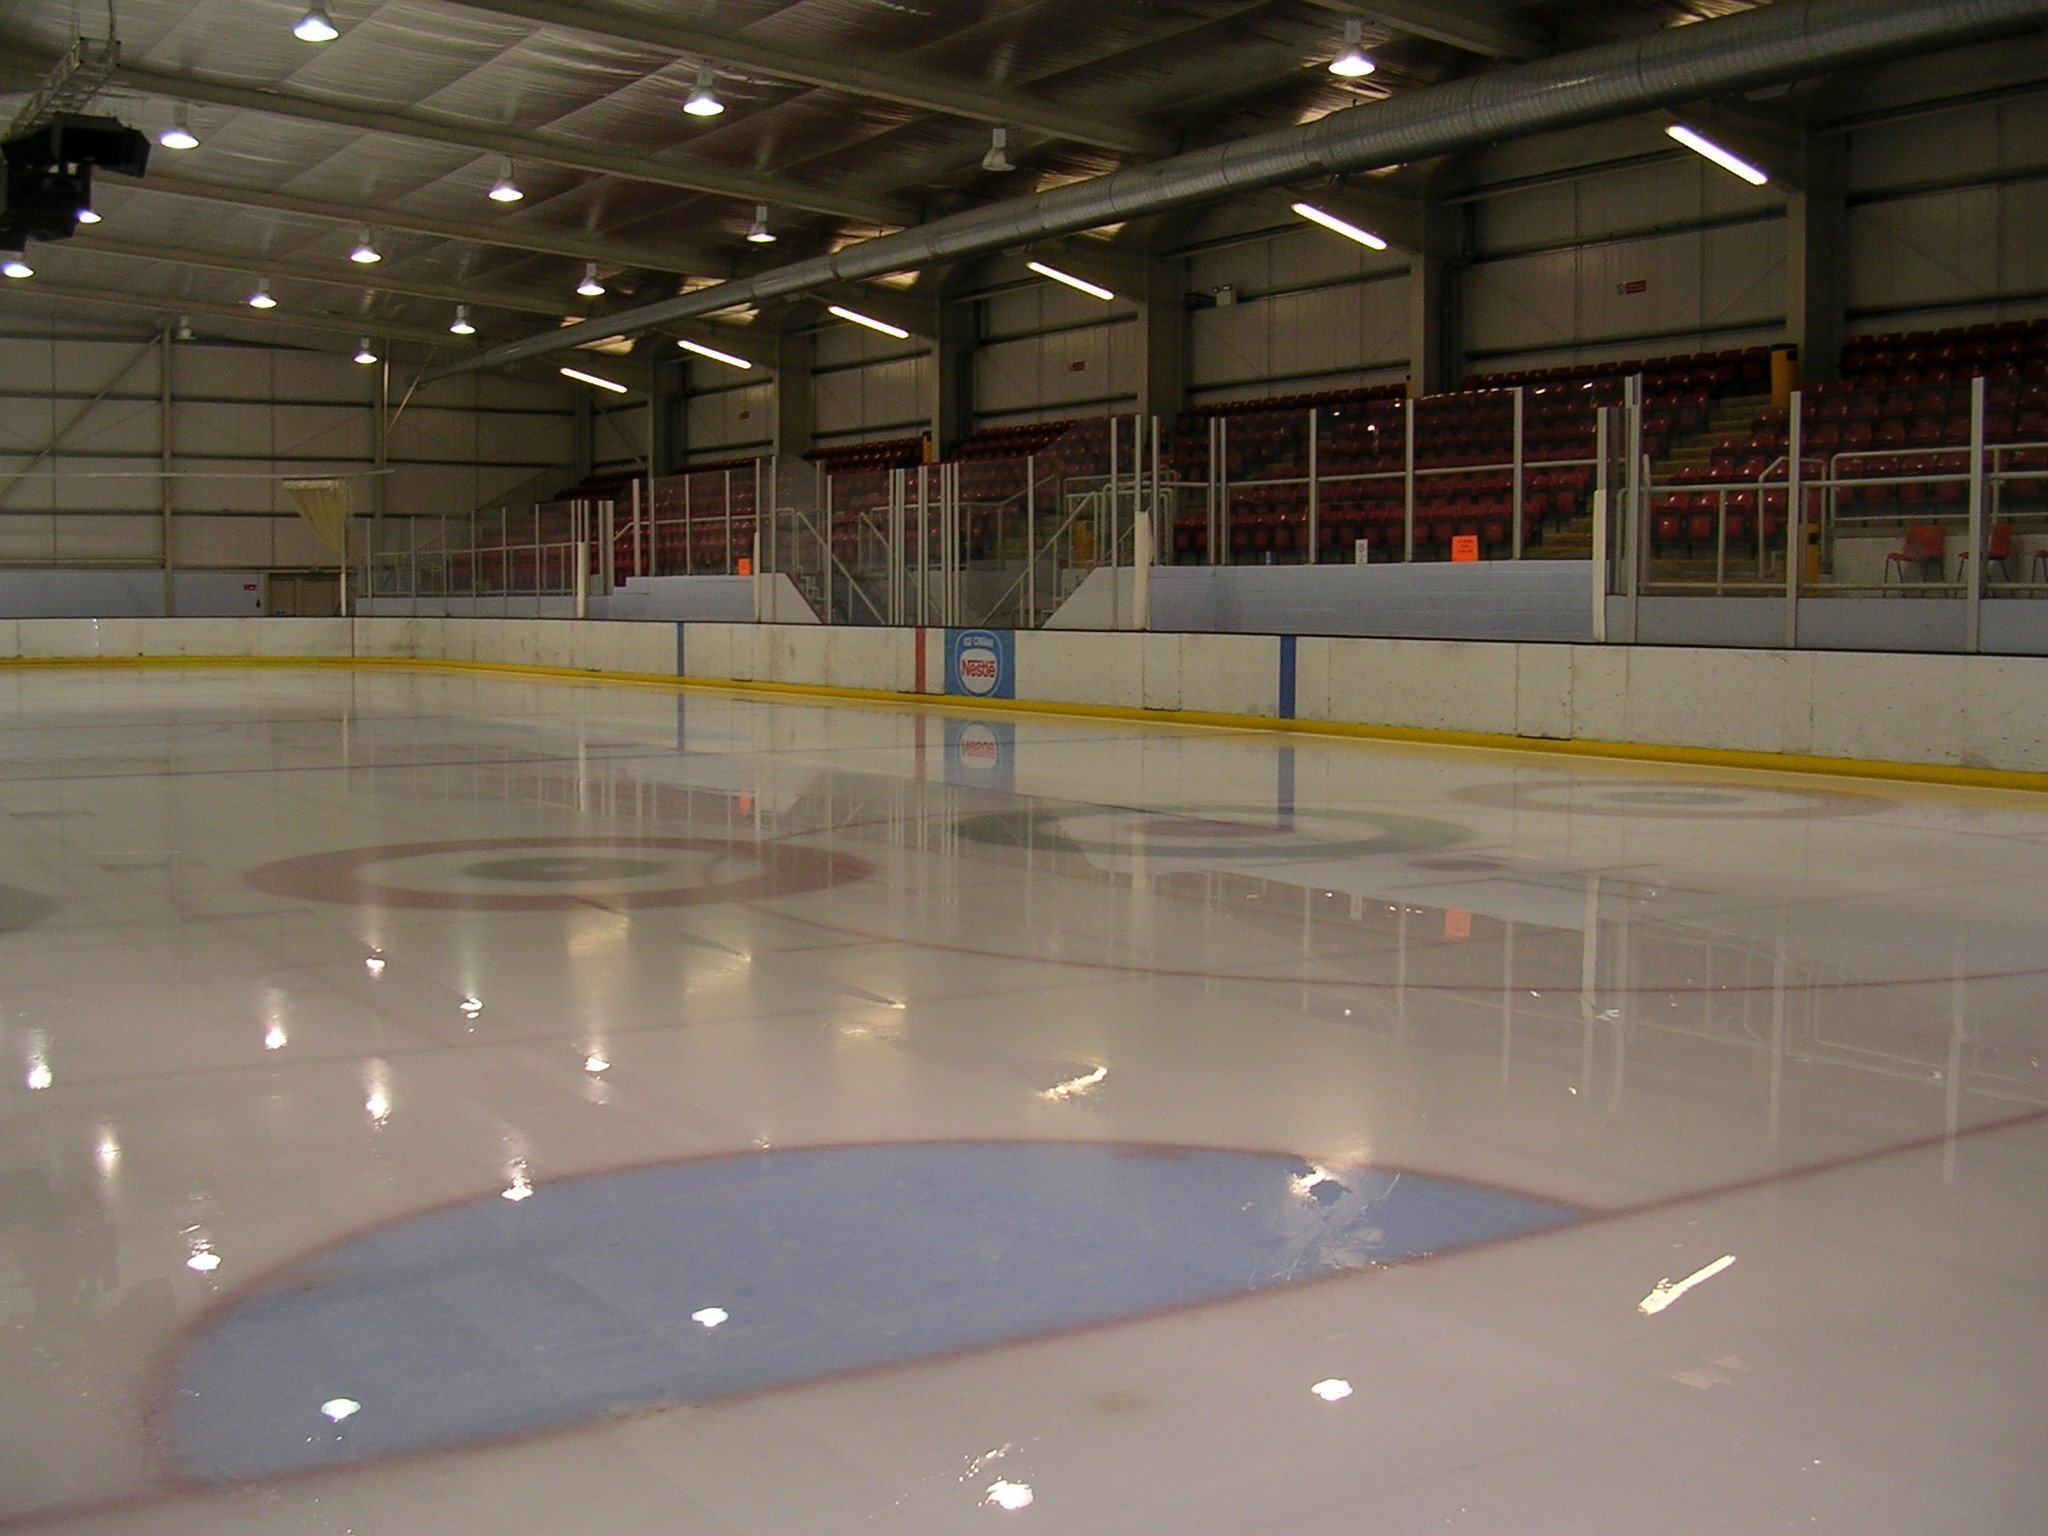 Deeside Ice Skating Rink, home to a world of memories.